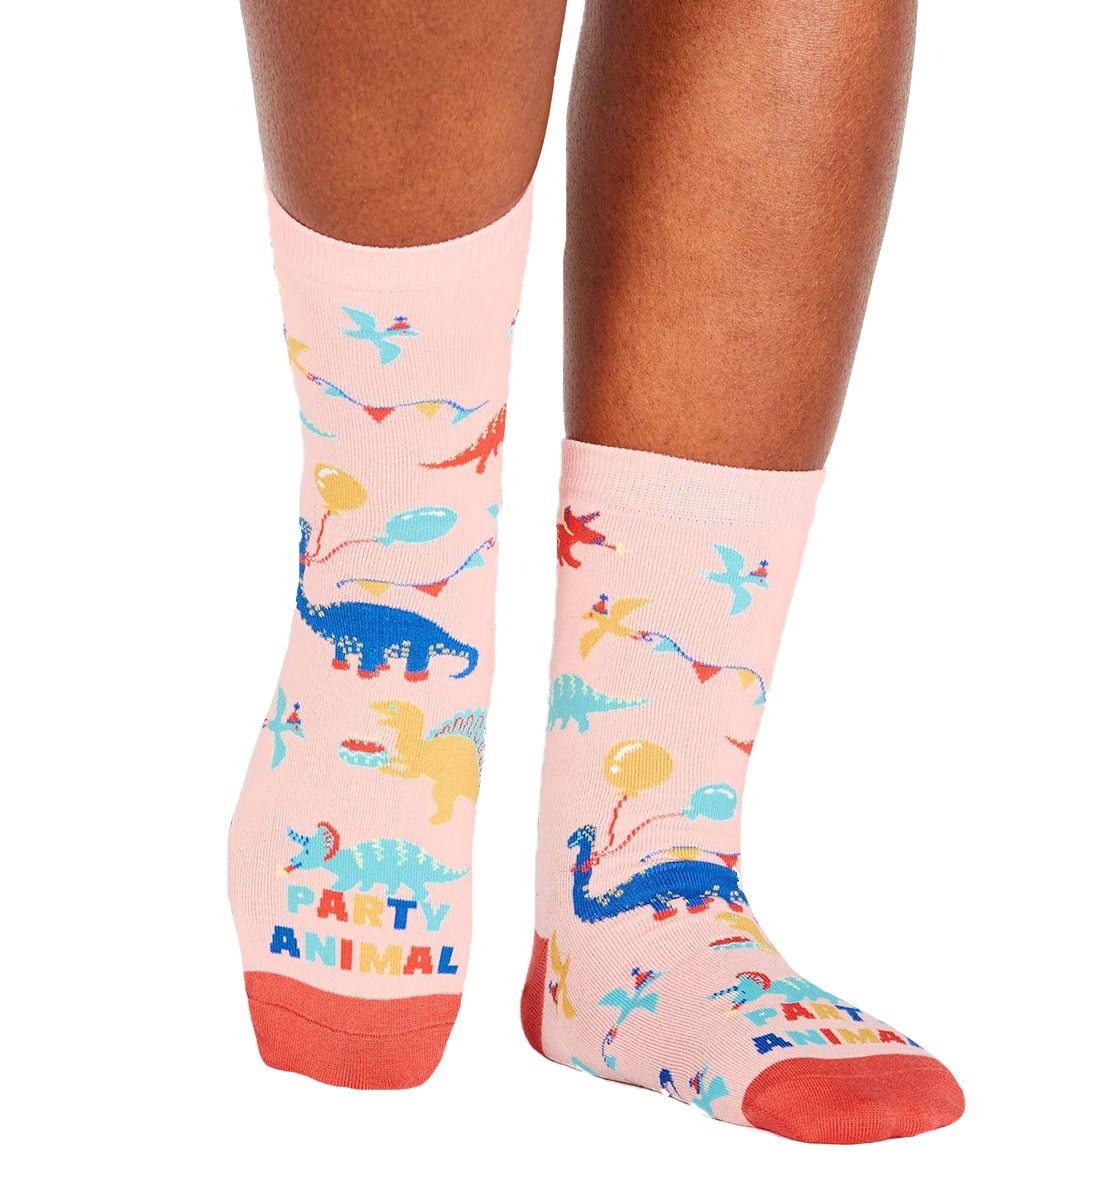 SOCK it to me Women's Crew Socks (w0142)- Party Animal - Party Animal,One Size